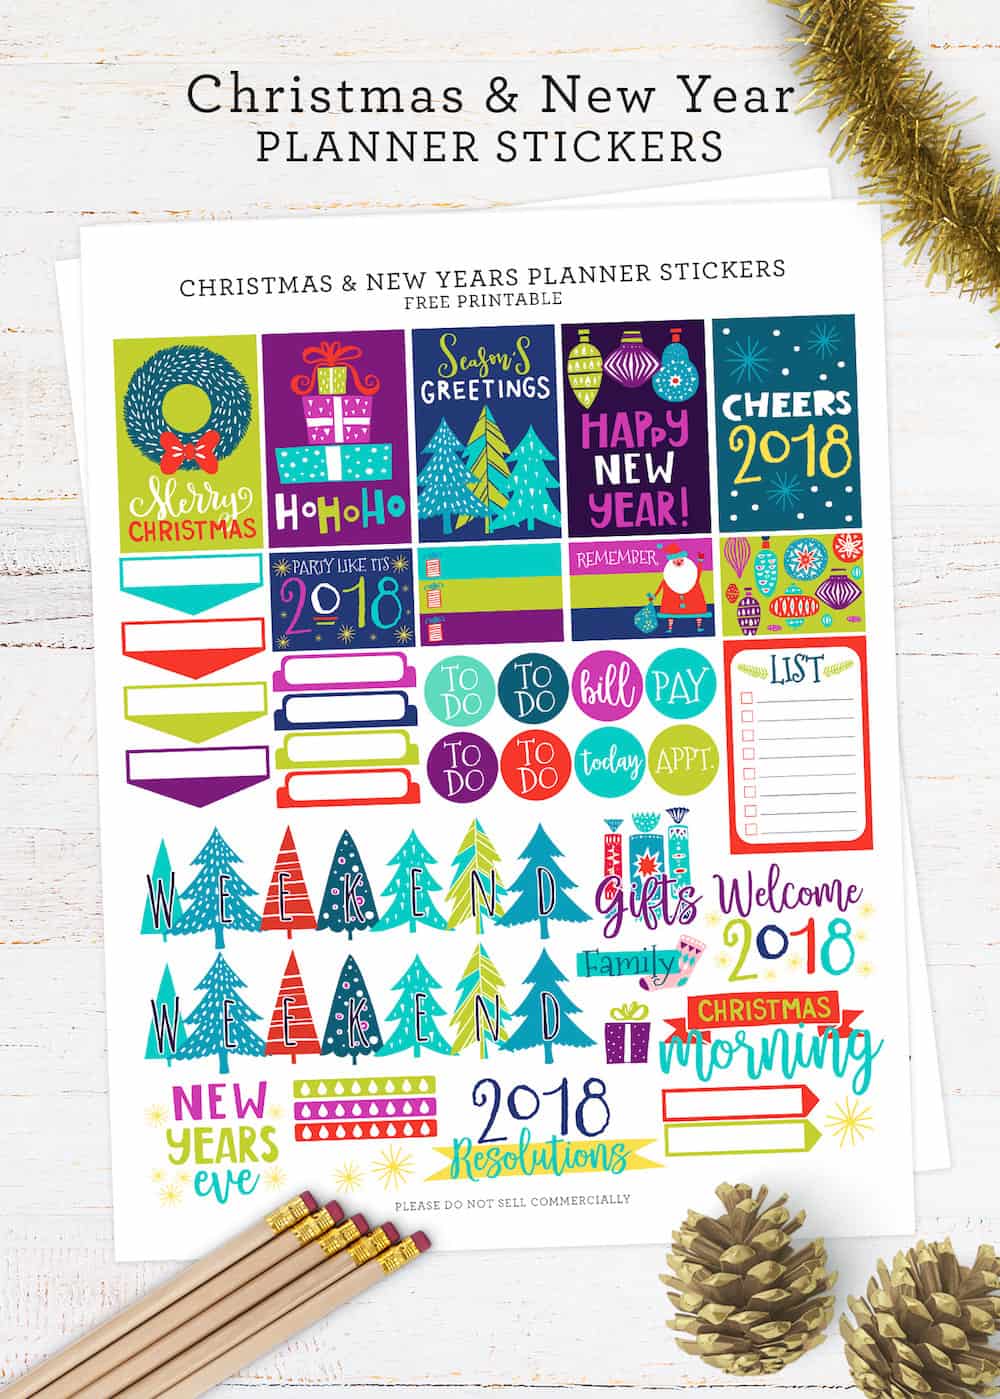 New Year planner stickers